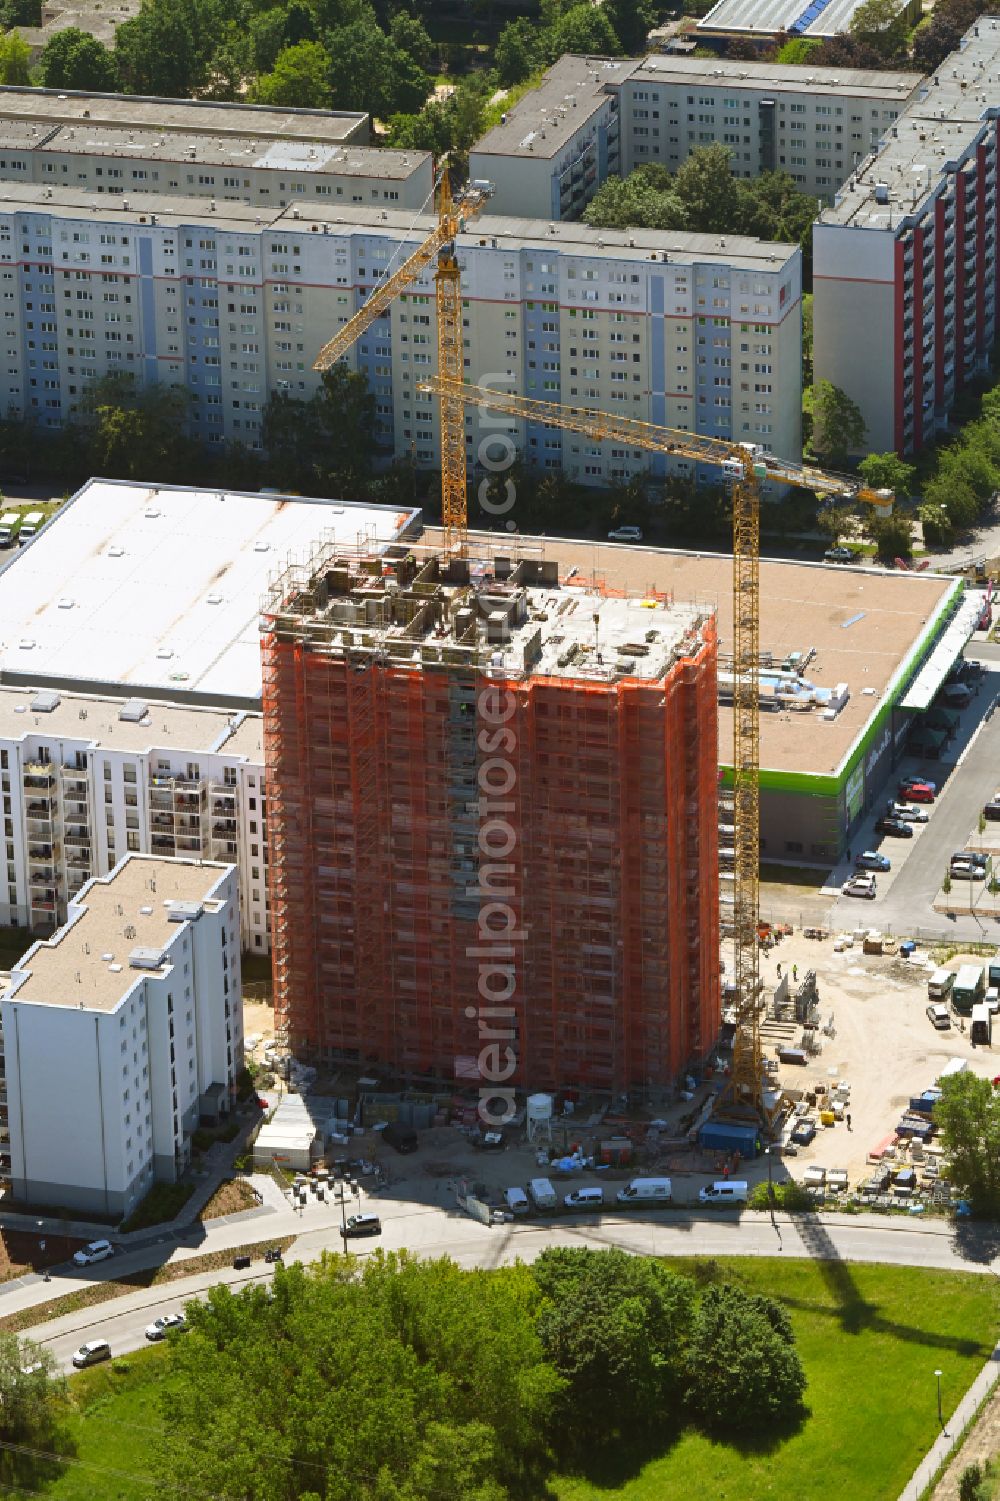 Aerial photograph Berlin - High-rise construction site for a new residential and commercial building Wuhletaler Fenster on street Maerkischen Allee in the district Marzahn in Berlin, Germany